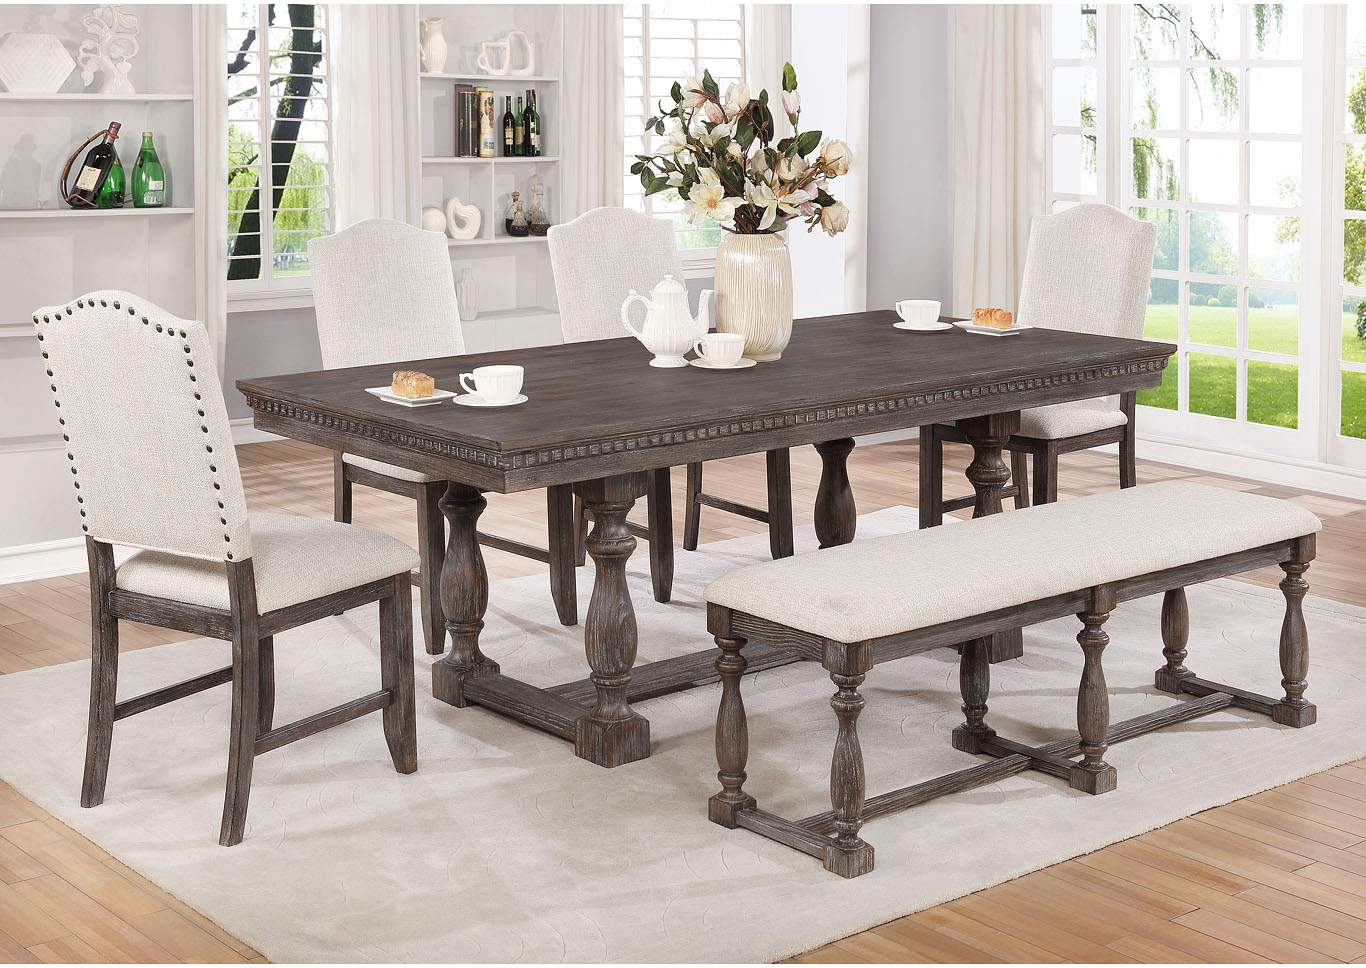 Ivan Smith Regent Brown Formal Dining Set W 4 Chairs Bench pertaining to size 1366 X 968